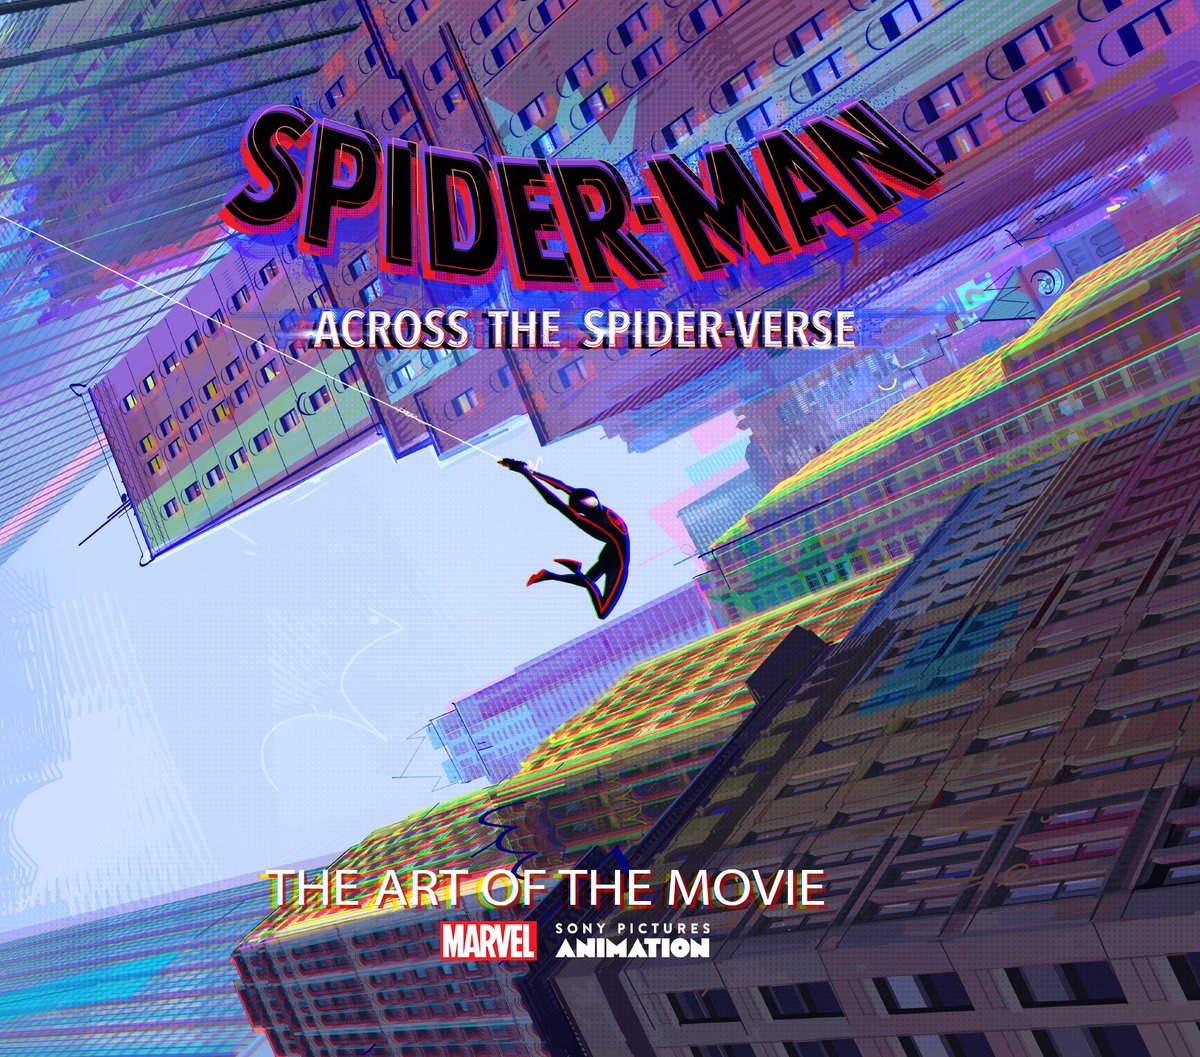 RT @okeefe_artist: The Art of Spider-Man Across the Spider-Verse Book cover. https://t.co/z1YZ4AyKke